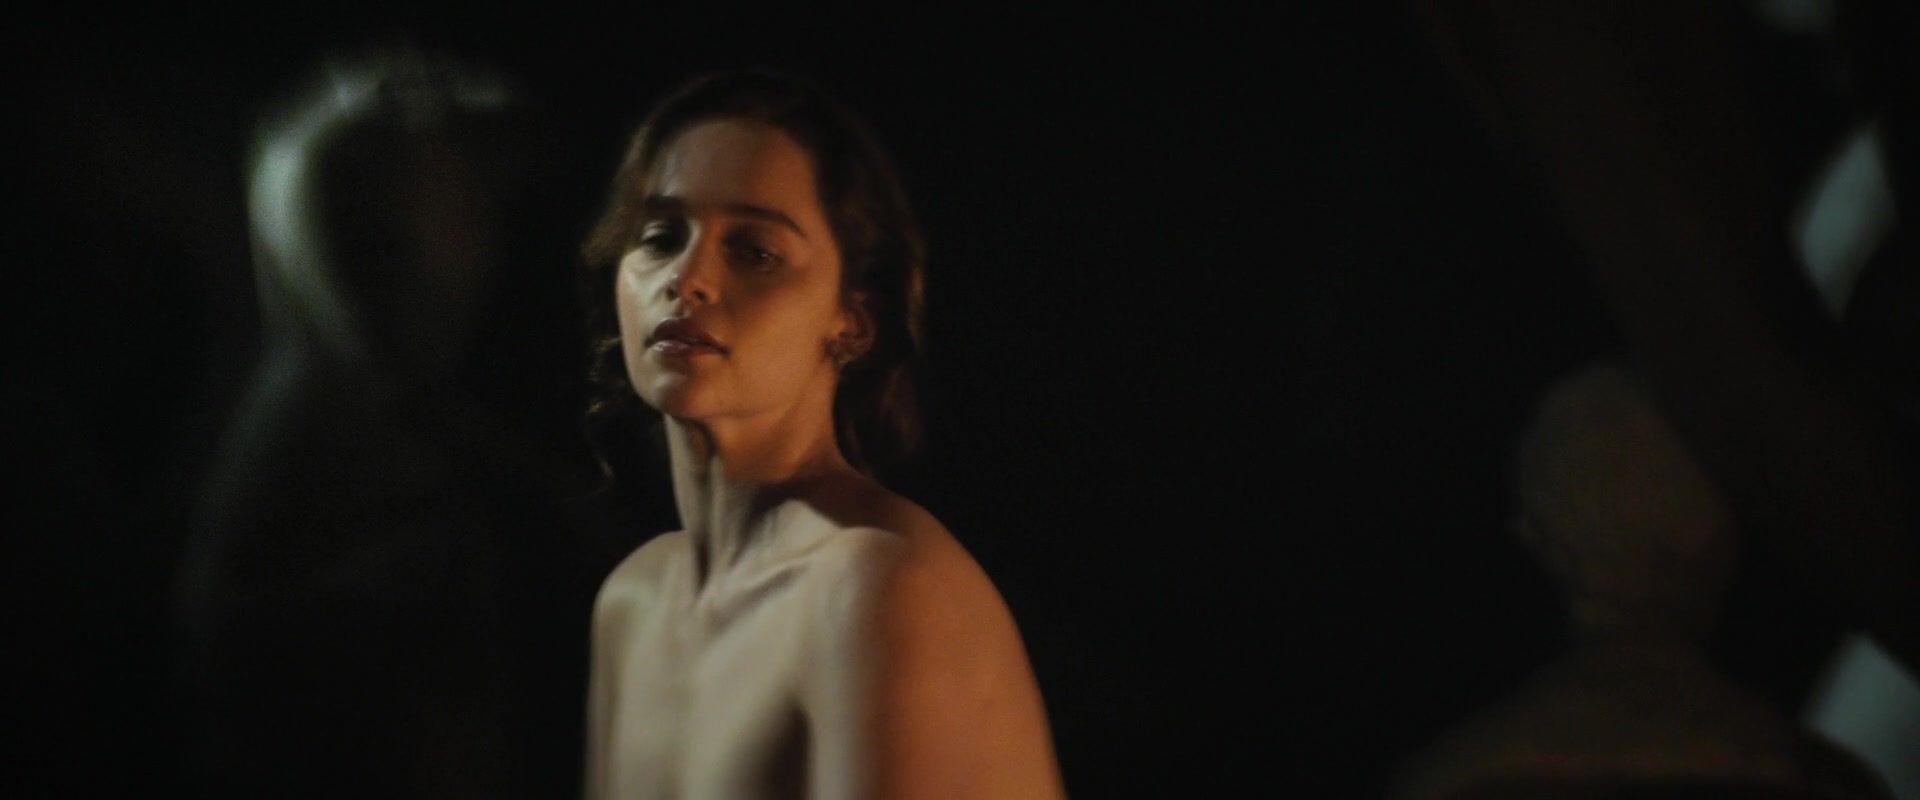 Wav Naked Emilia Clarke in topless scene of the movie "Voice from the Stone" | Released in 2017 Hardcore Sex - 1